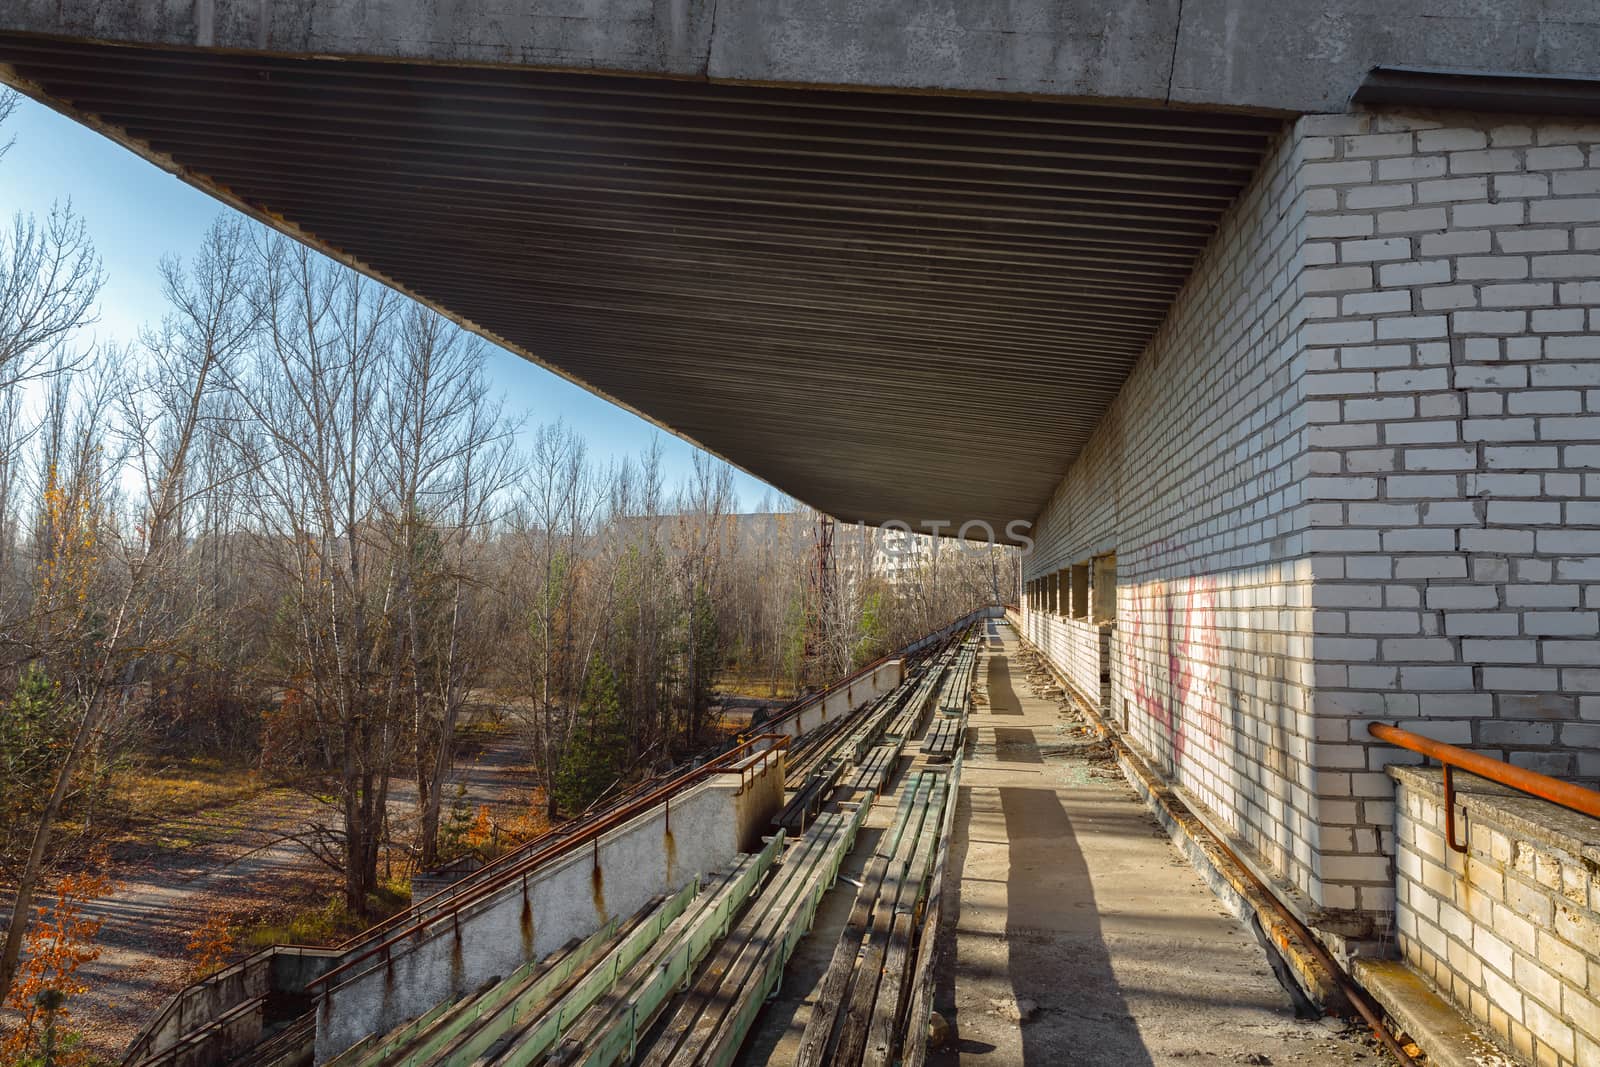 Part of the Abandoned stadium in Pripyat, Chernobyl Exclusion Zone 2019 by svedoliver